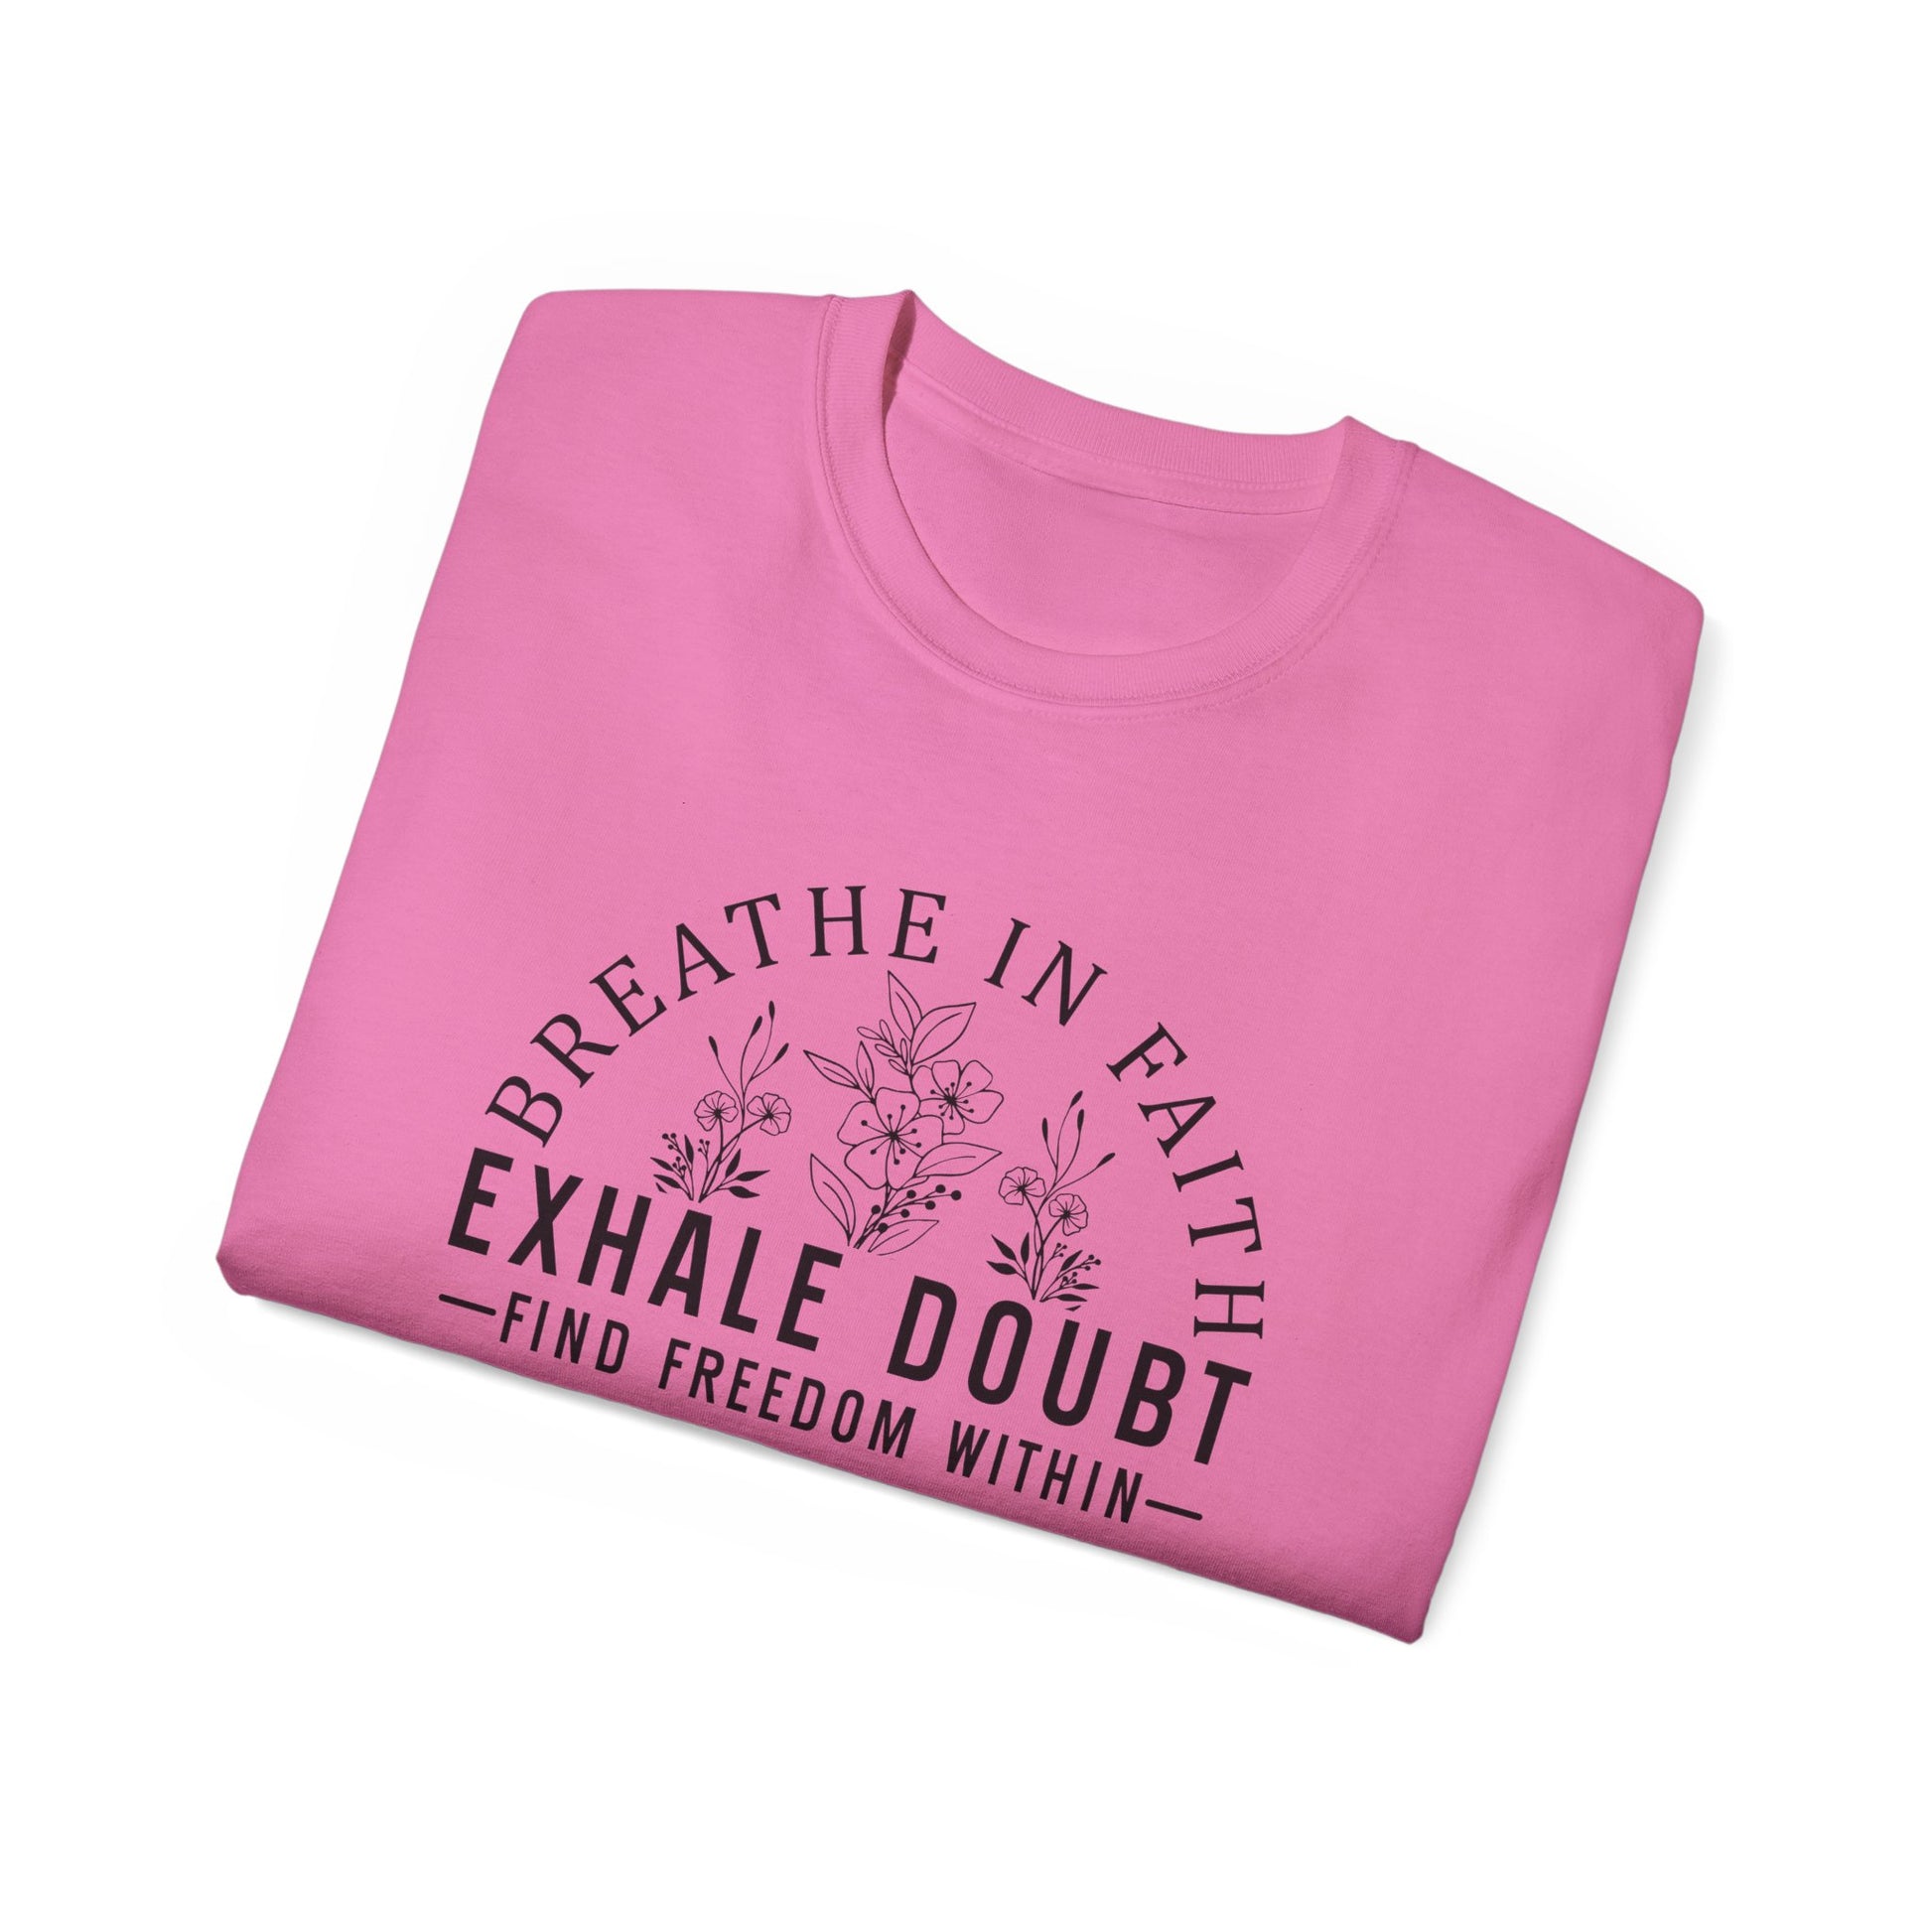 BREATHE IN FAITH EXHALE DOUBT FIND FREEDOM FROM WITHIN Unisex Christian Ultra Cotton Tee Printify